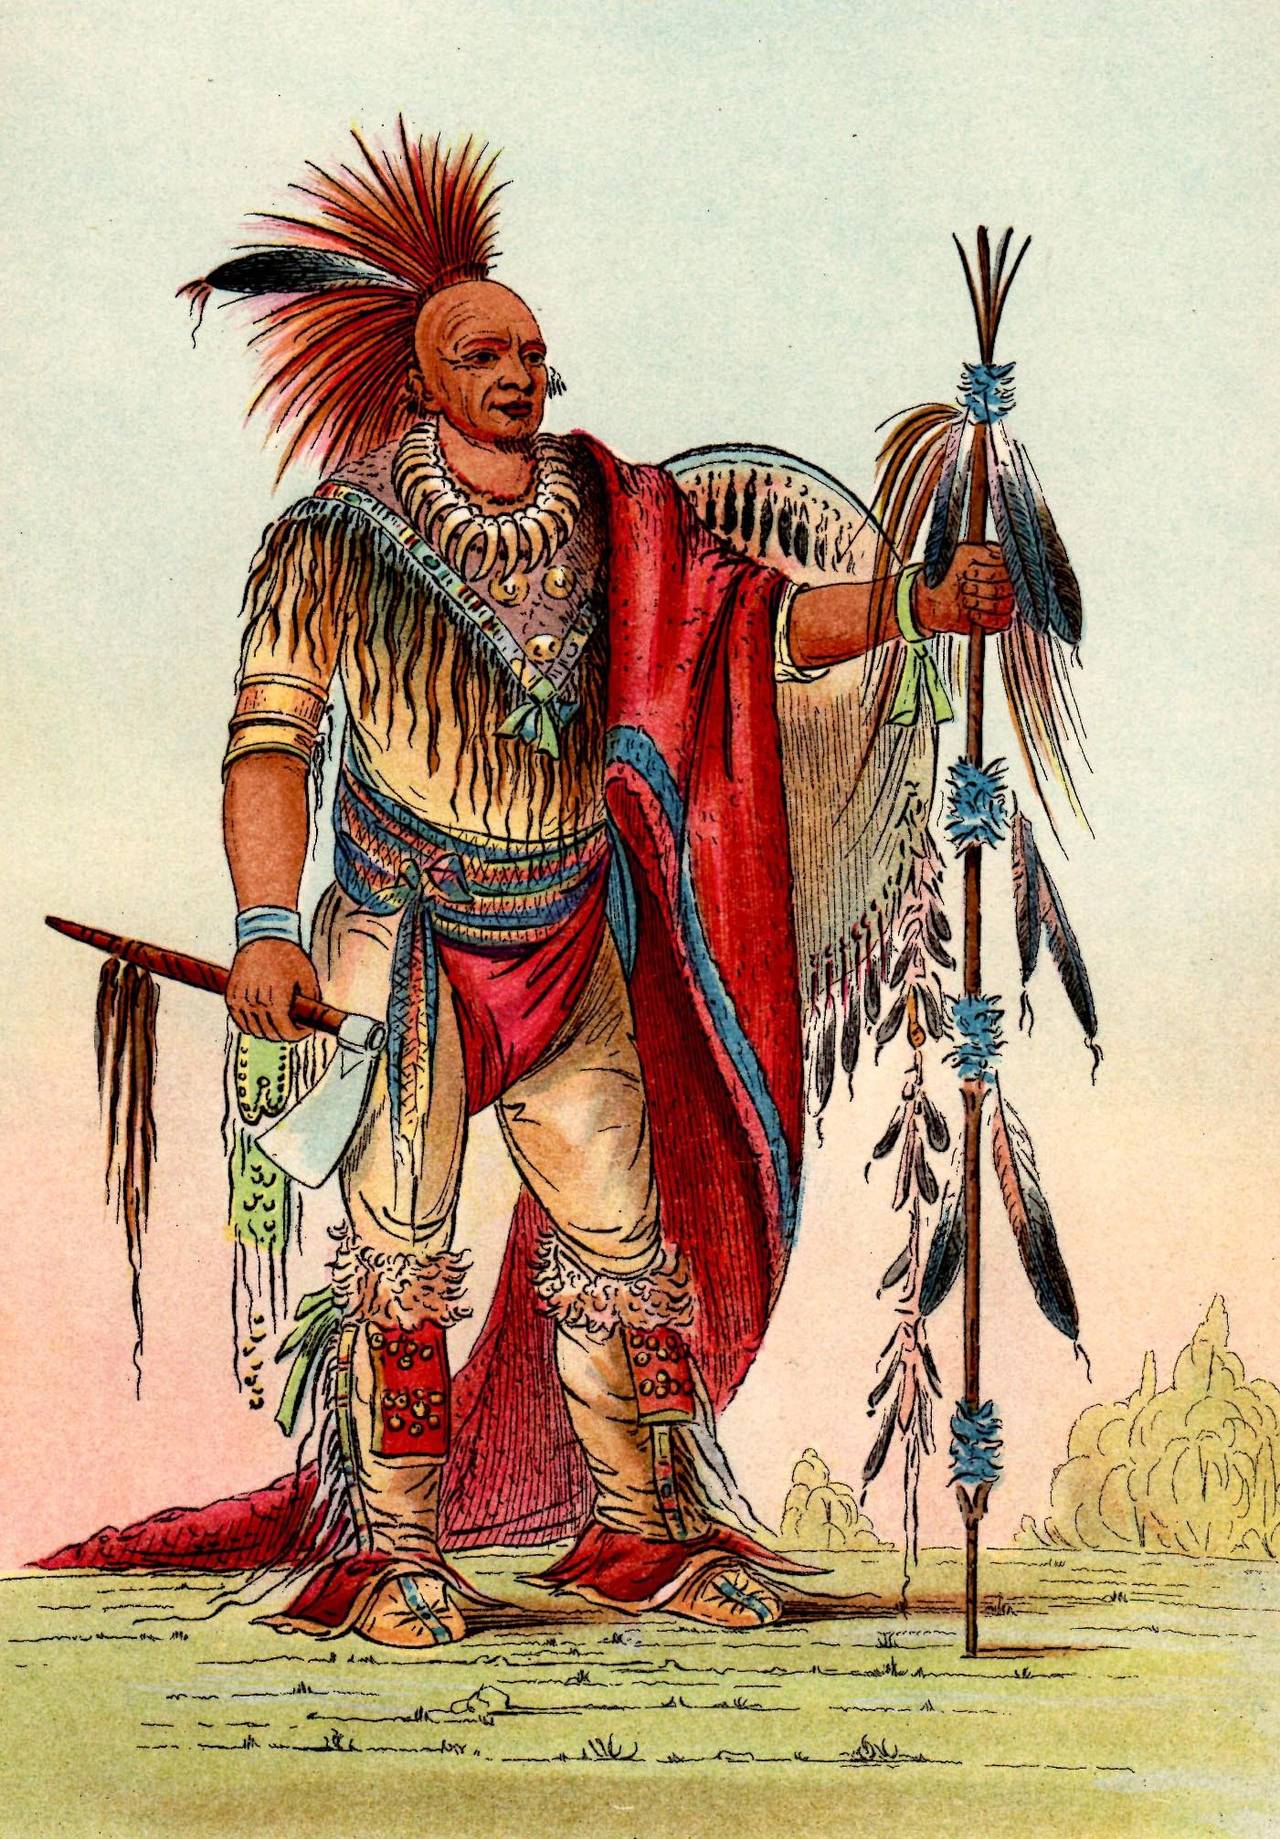 Sac and Fox Chiefs - Print by George Catlin